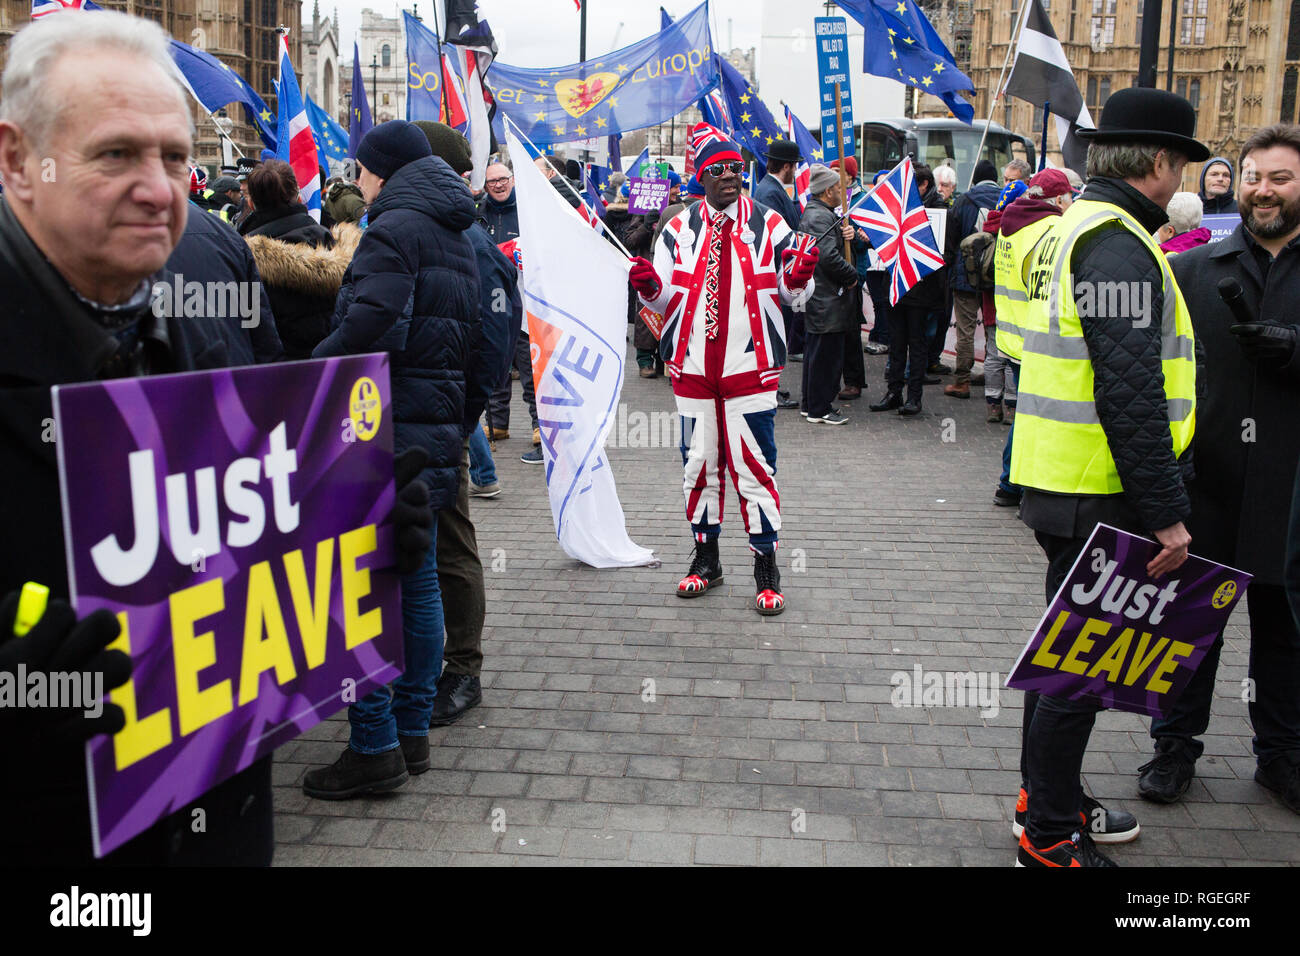 London UK 29th Jan 2019 A pro-Brexit activist dressed in Union flag themed clothes demonstrates opposite the Houses of Parliament in London on the day MPs vote on EU withdrawal deal amendments. Credit: Thabo Jaiyesimi/Alamy Live News Stock Photo